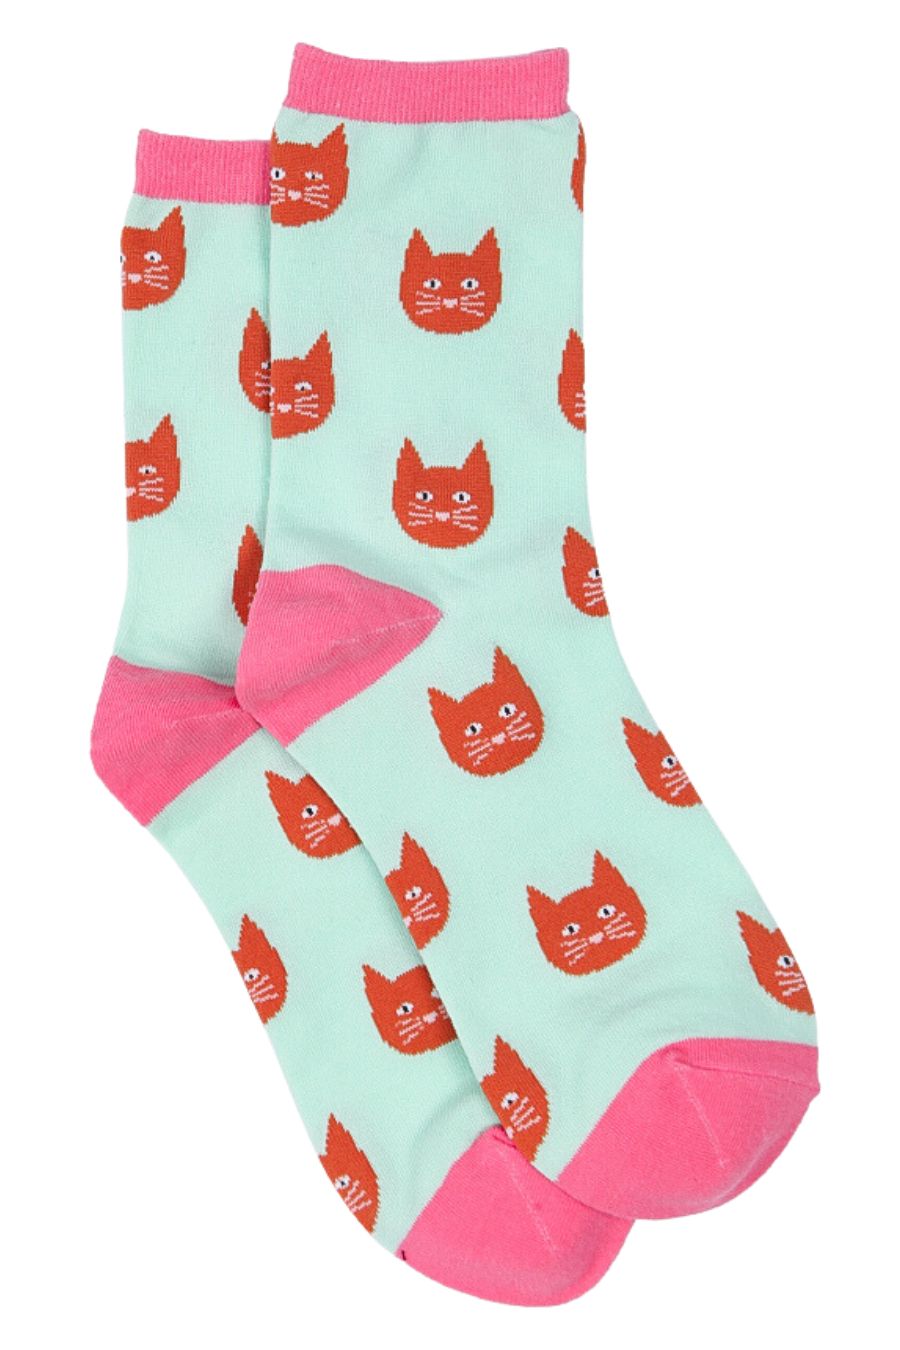 light green, pink ankle socks with cats faces all over